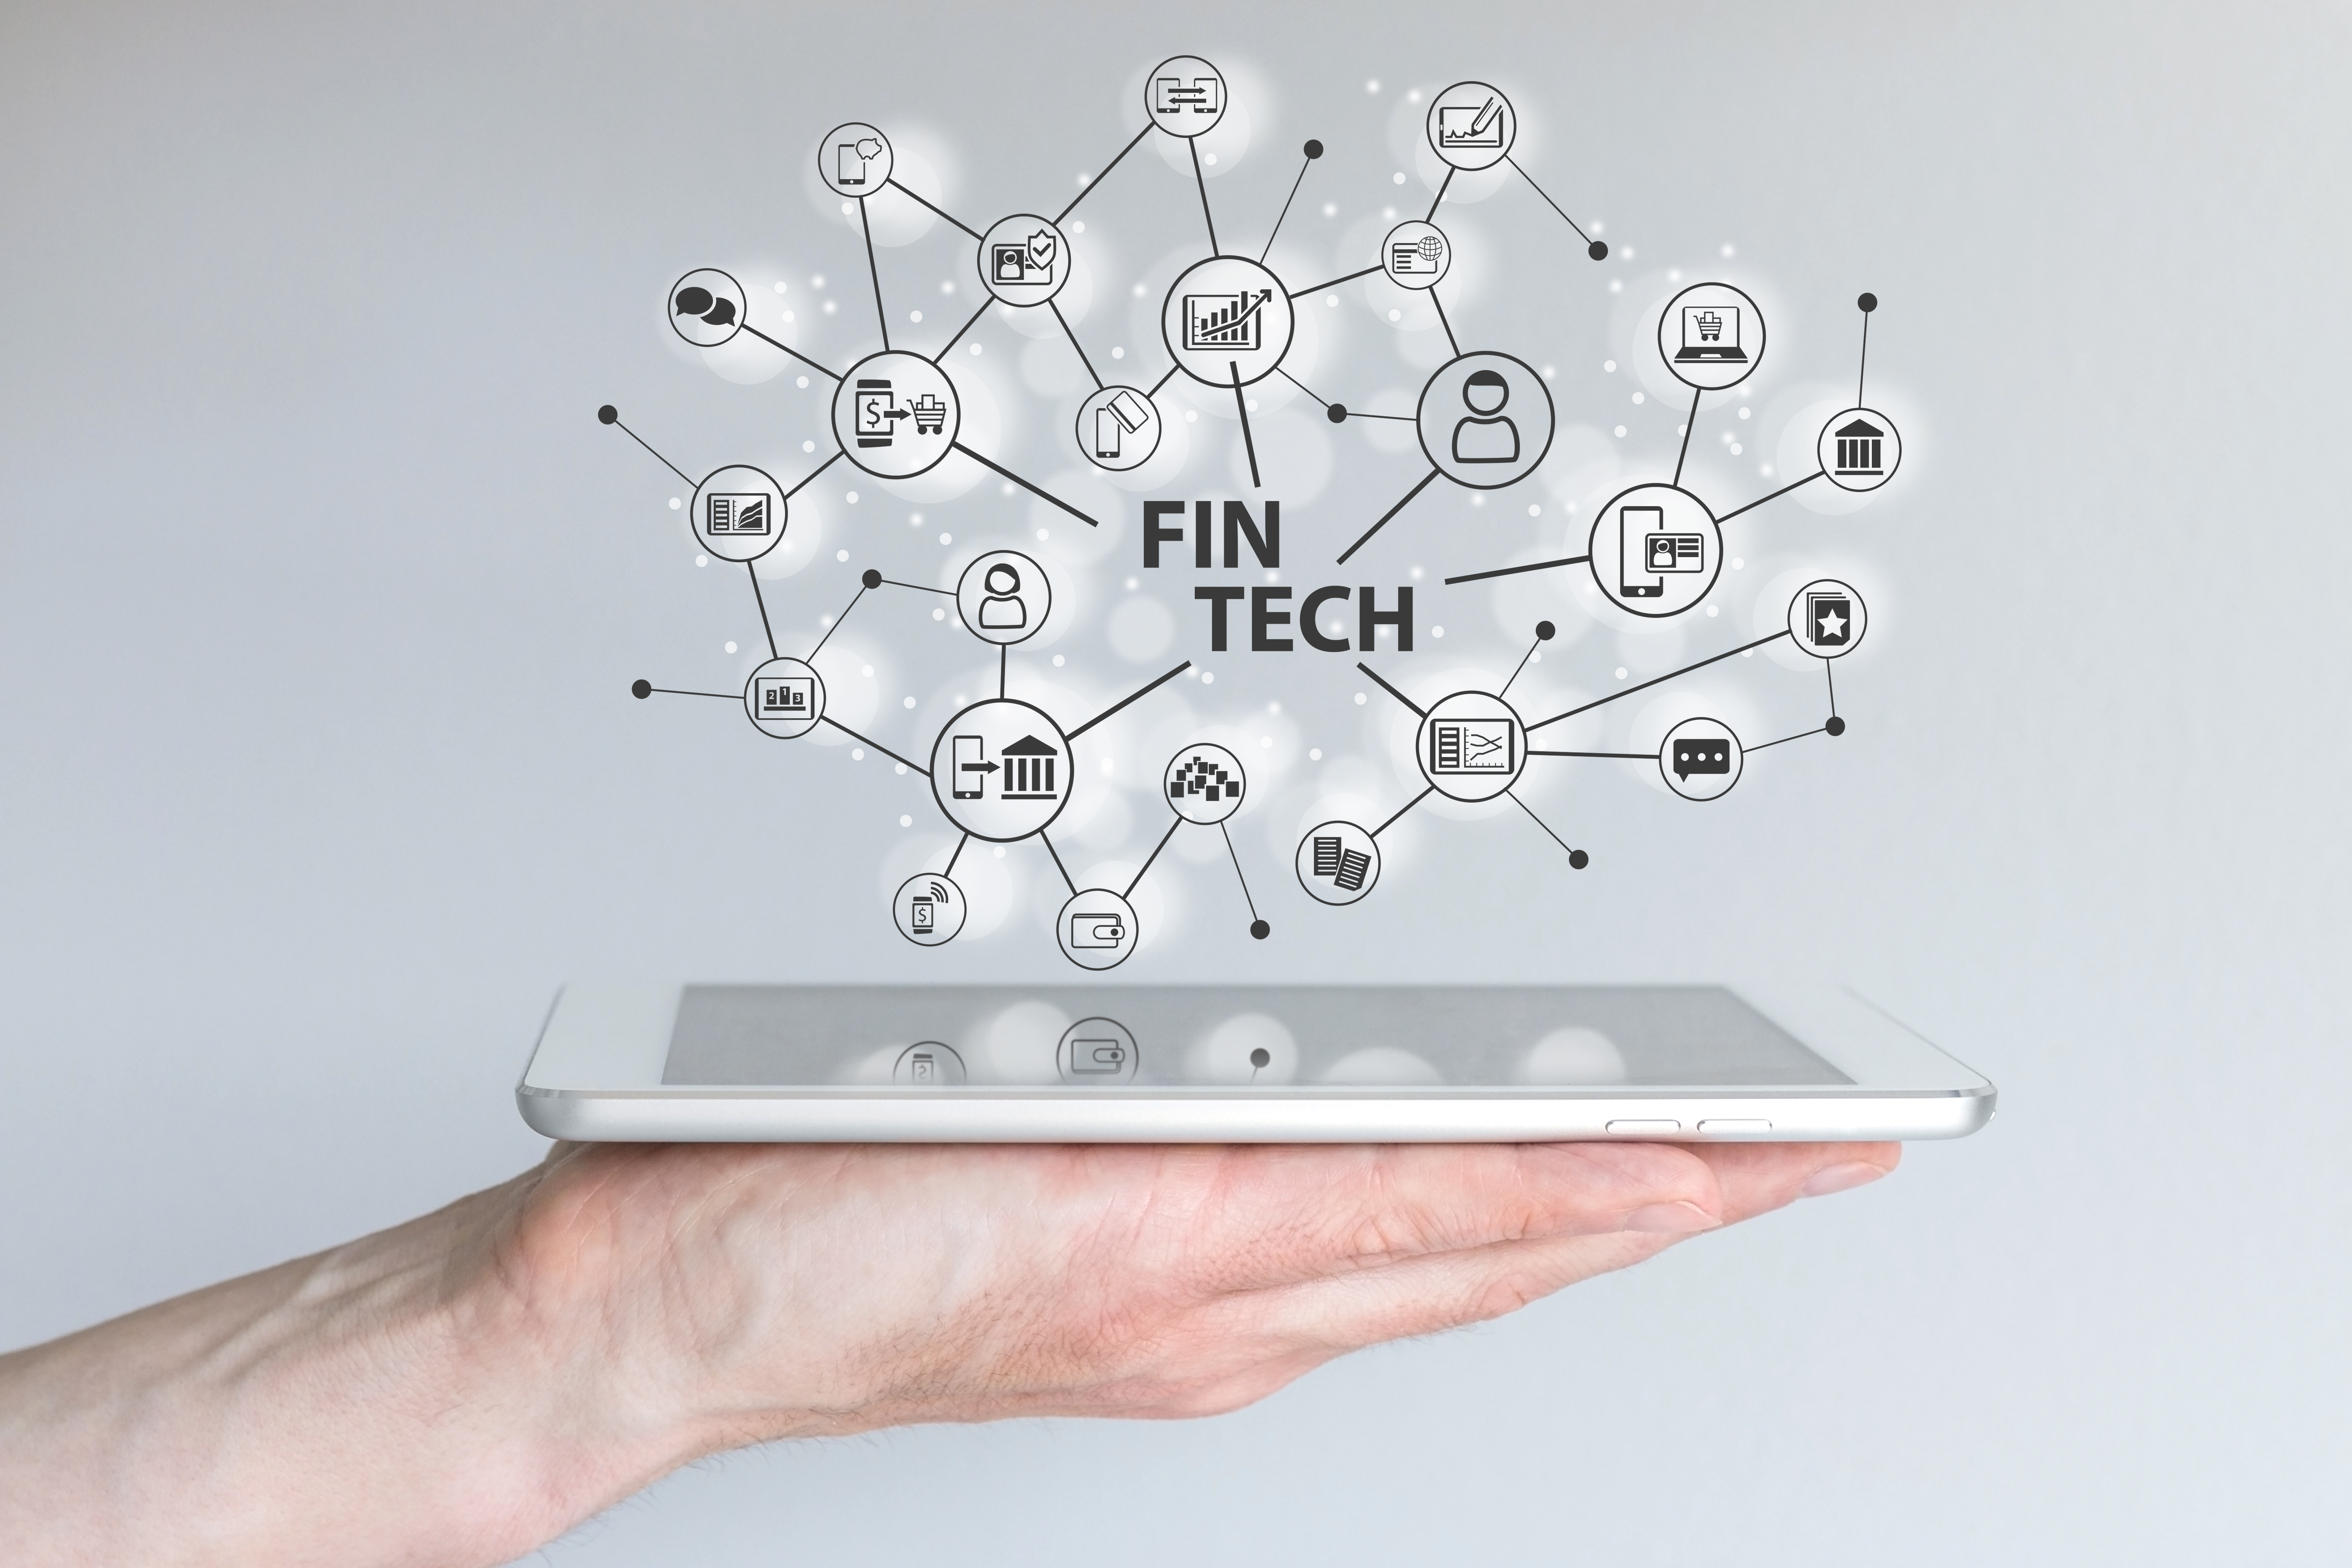 Global fintech deals declined 4% in 2019 as China investments fell sharply, report says